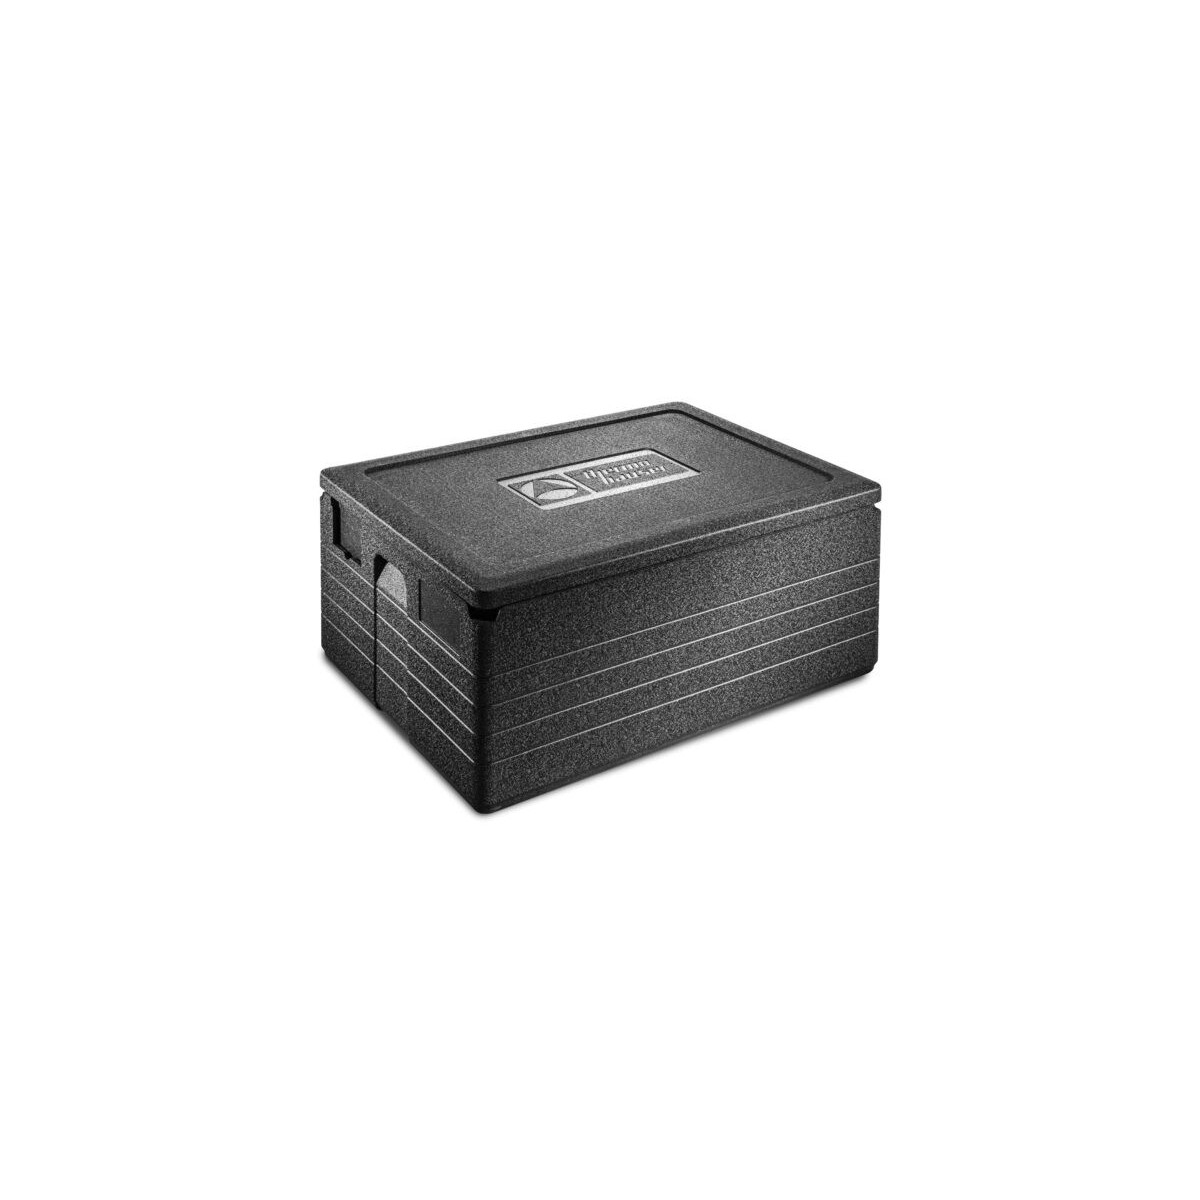 THERMOBOX THERMIC DIMENSIONS INTERIEURES 62.5X42.5XH26CM UNISTAR VOLUME 69L